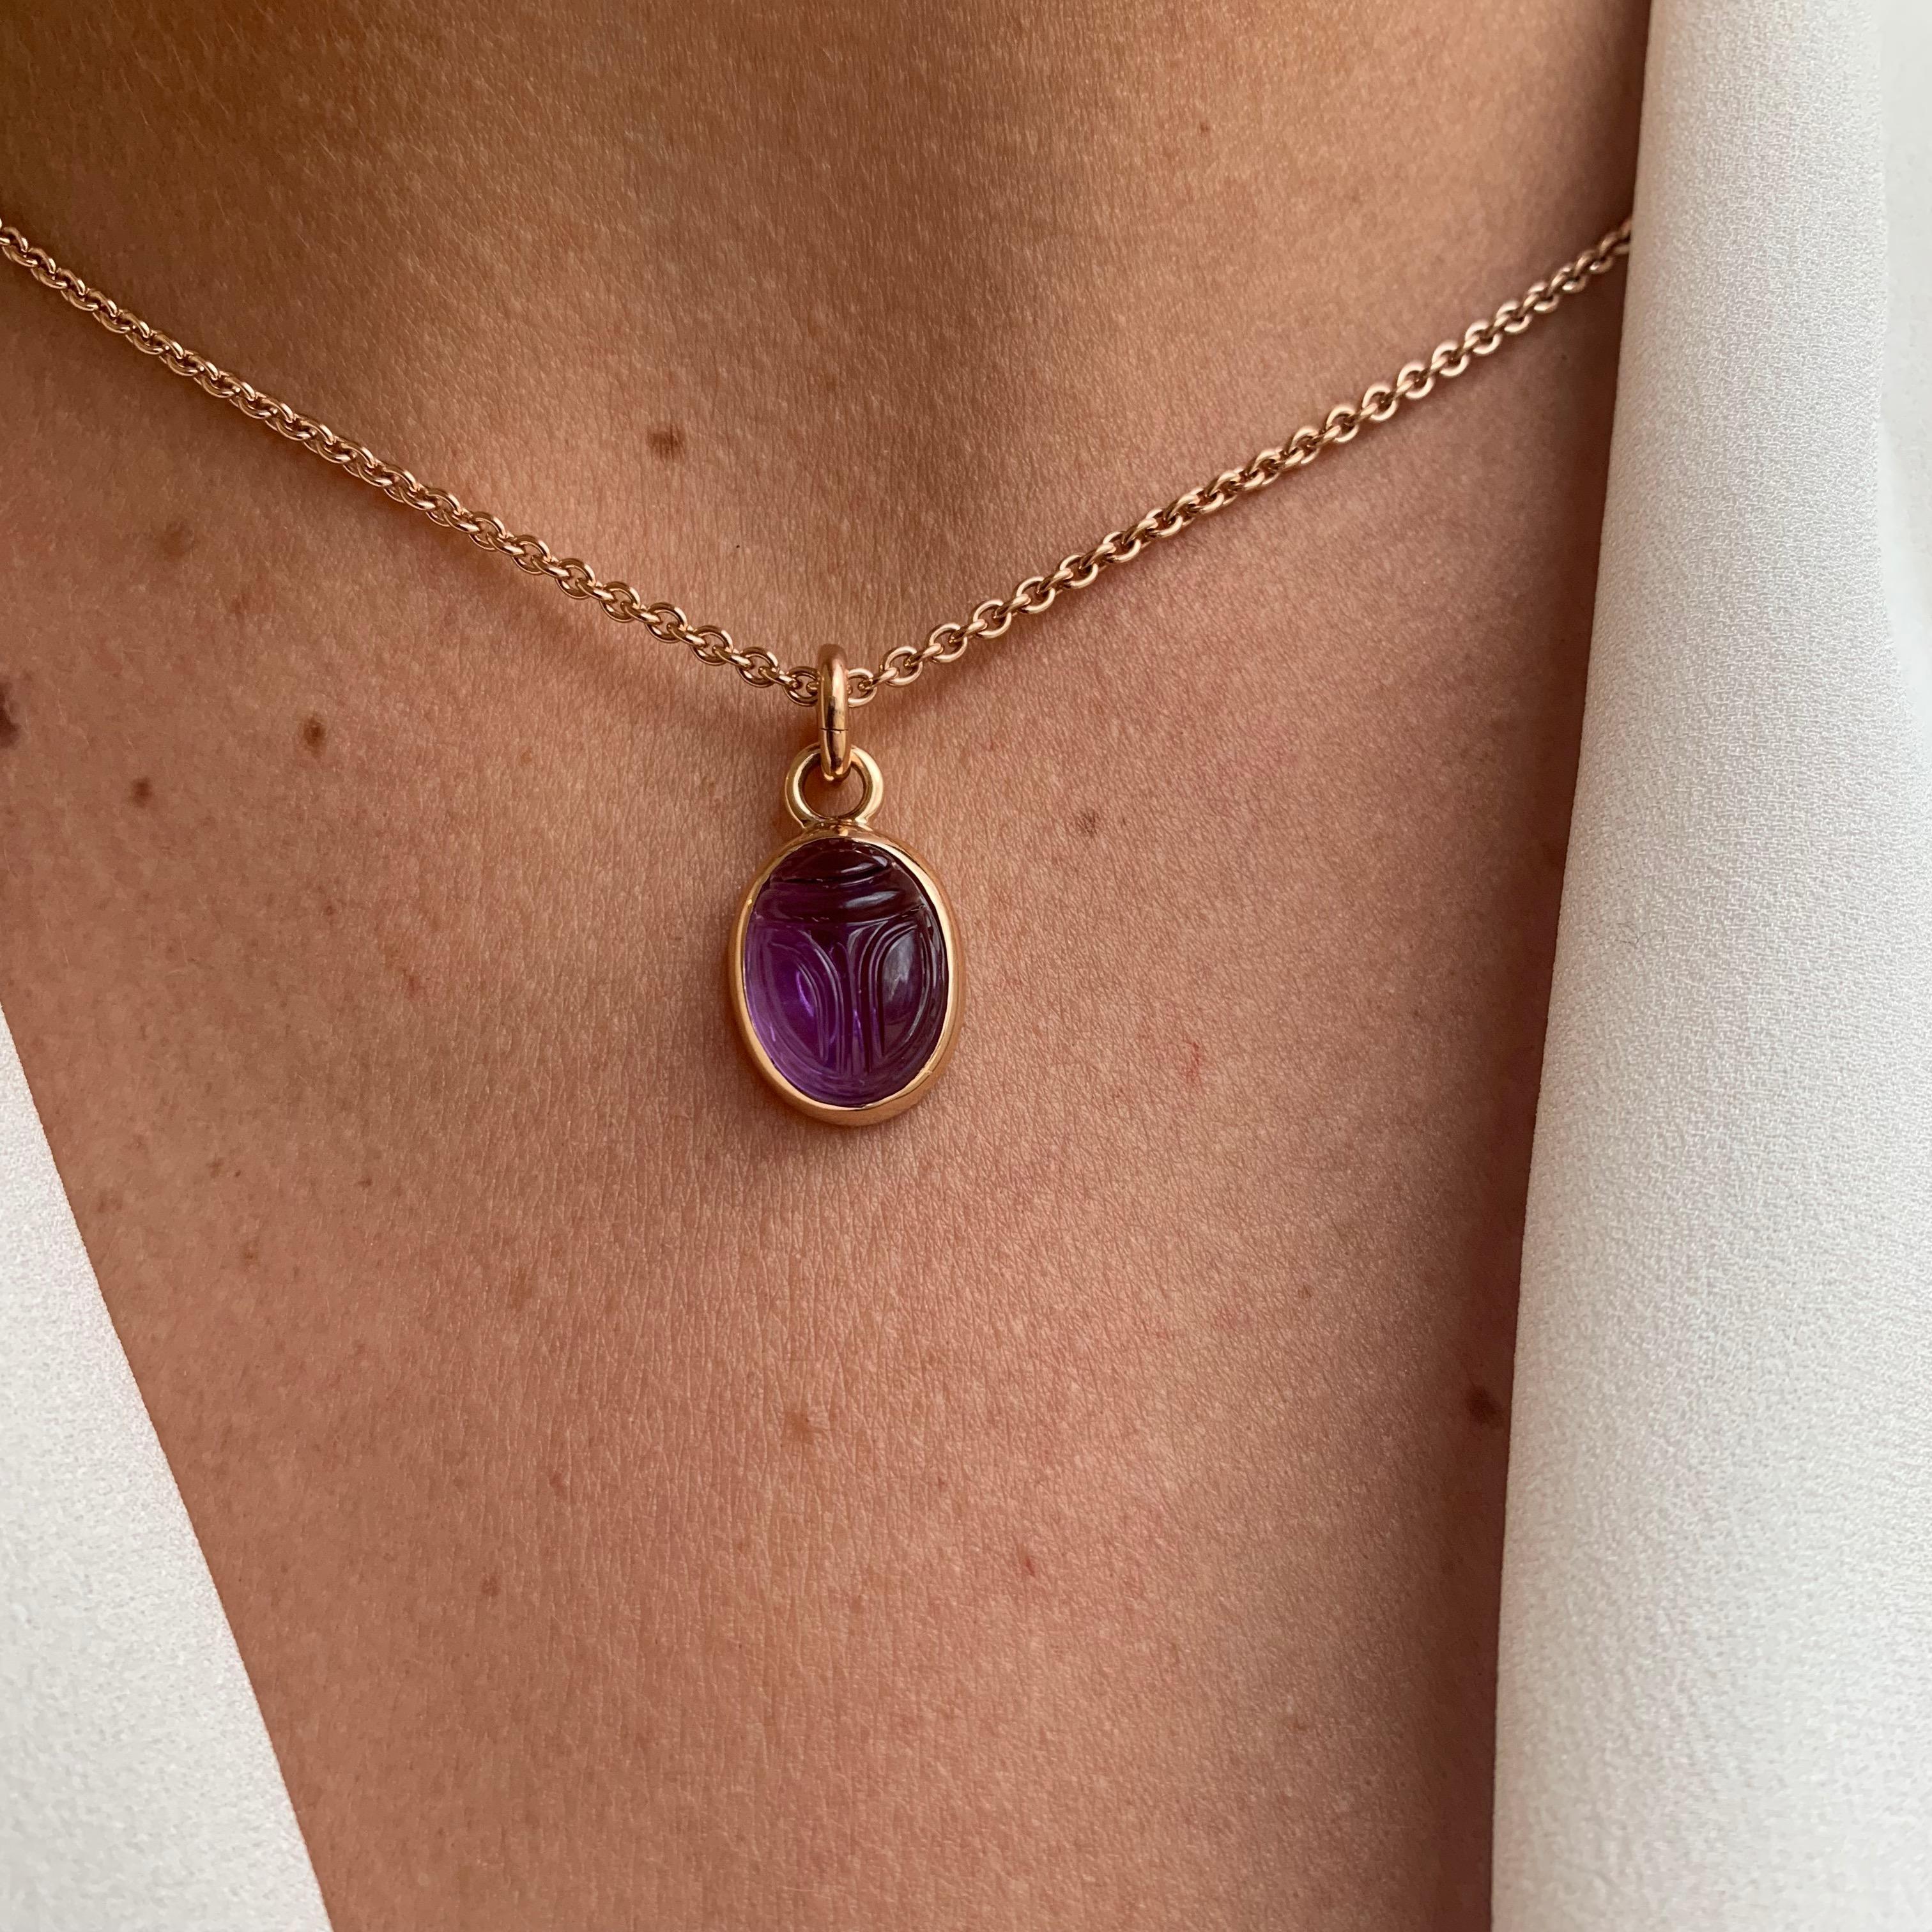 Scarab pendant in 18 carat rose gold with amethyst of 9.07 ct, carefully engraved by hand into the shape of a scarab. The ancient Egyptian lucky charm is a symbol of birth, regeneration, and good health. 